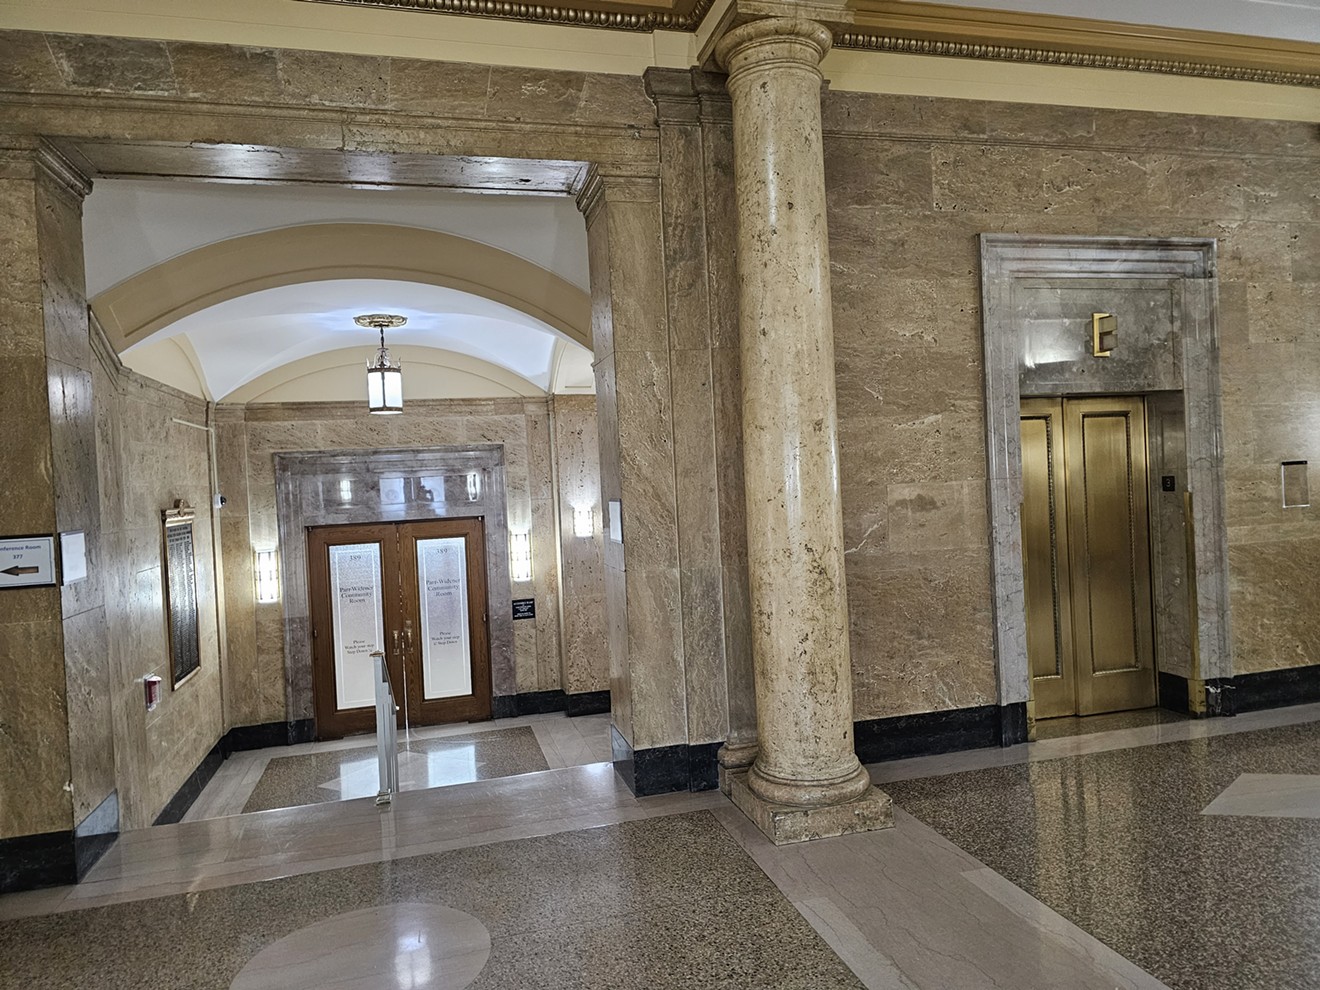 The entrance to the Parr-Widener Conference Room in City Hall.